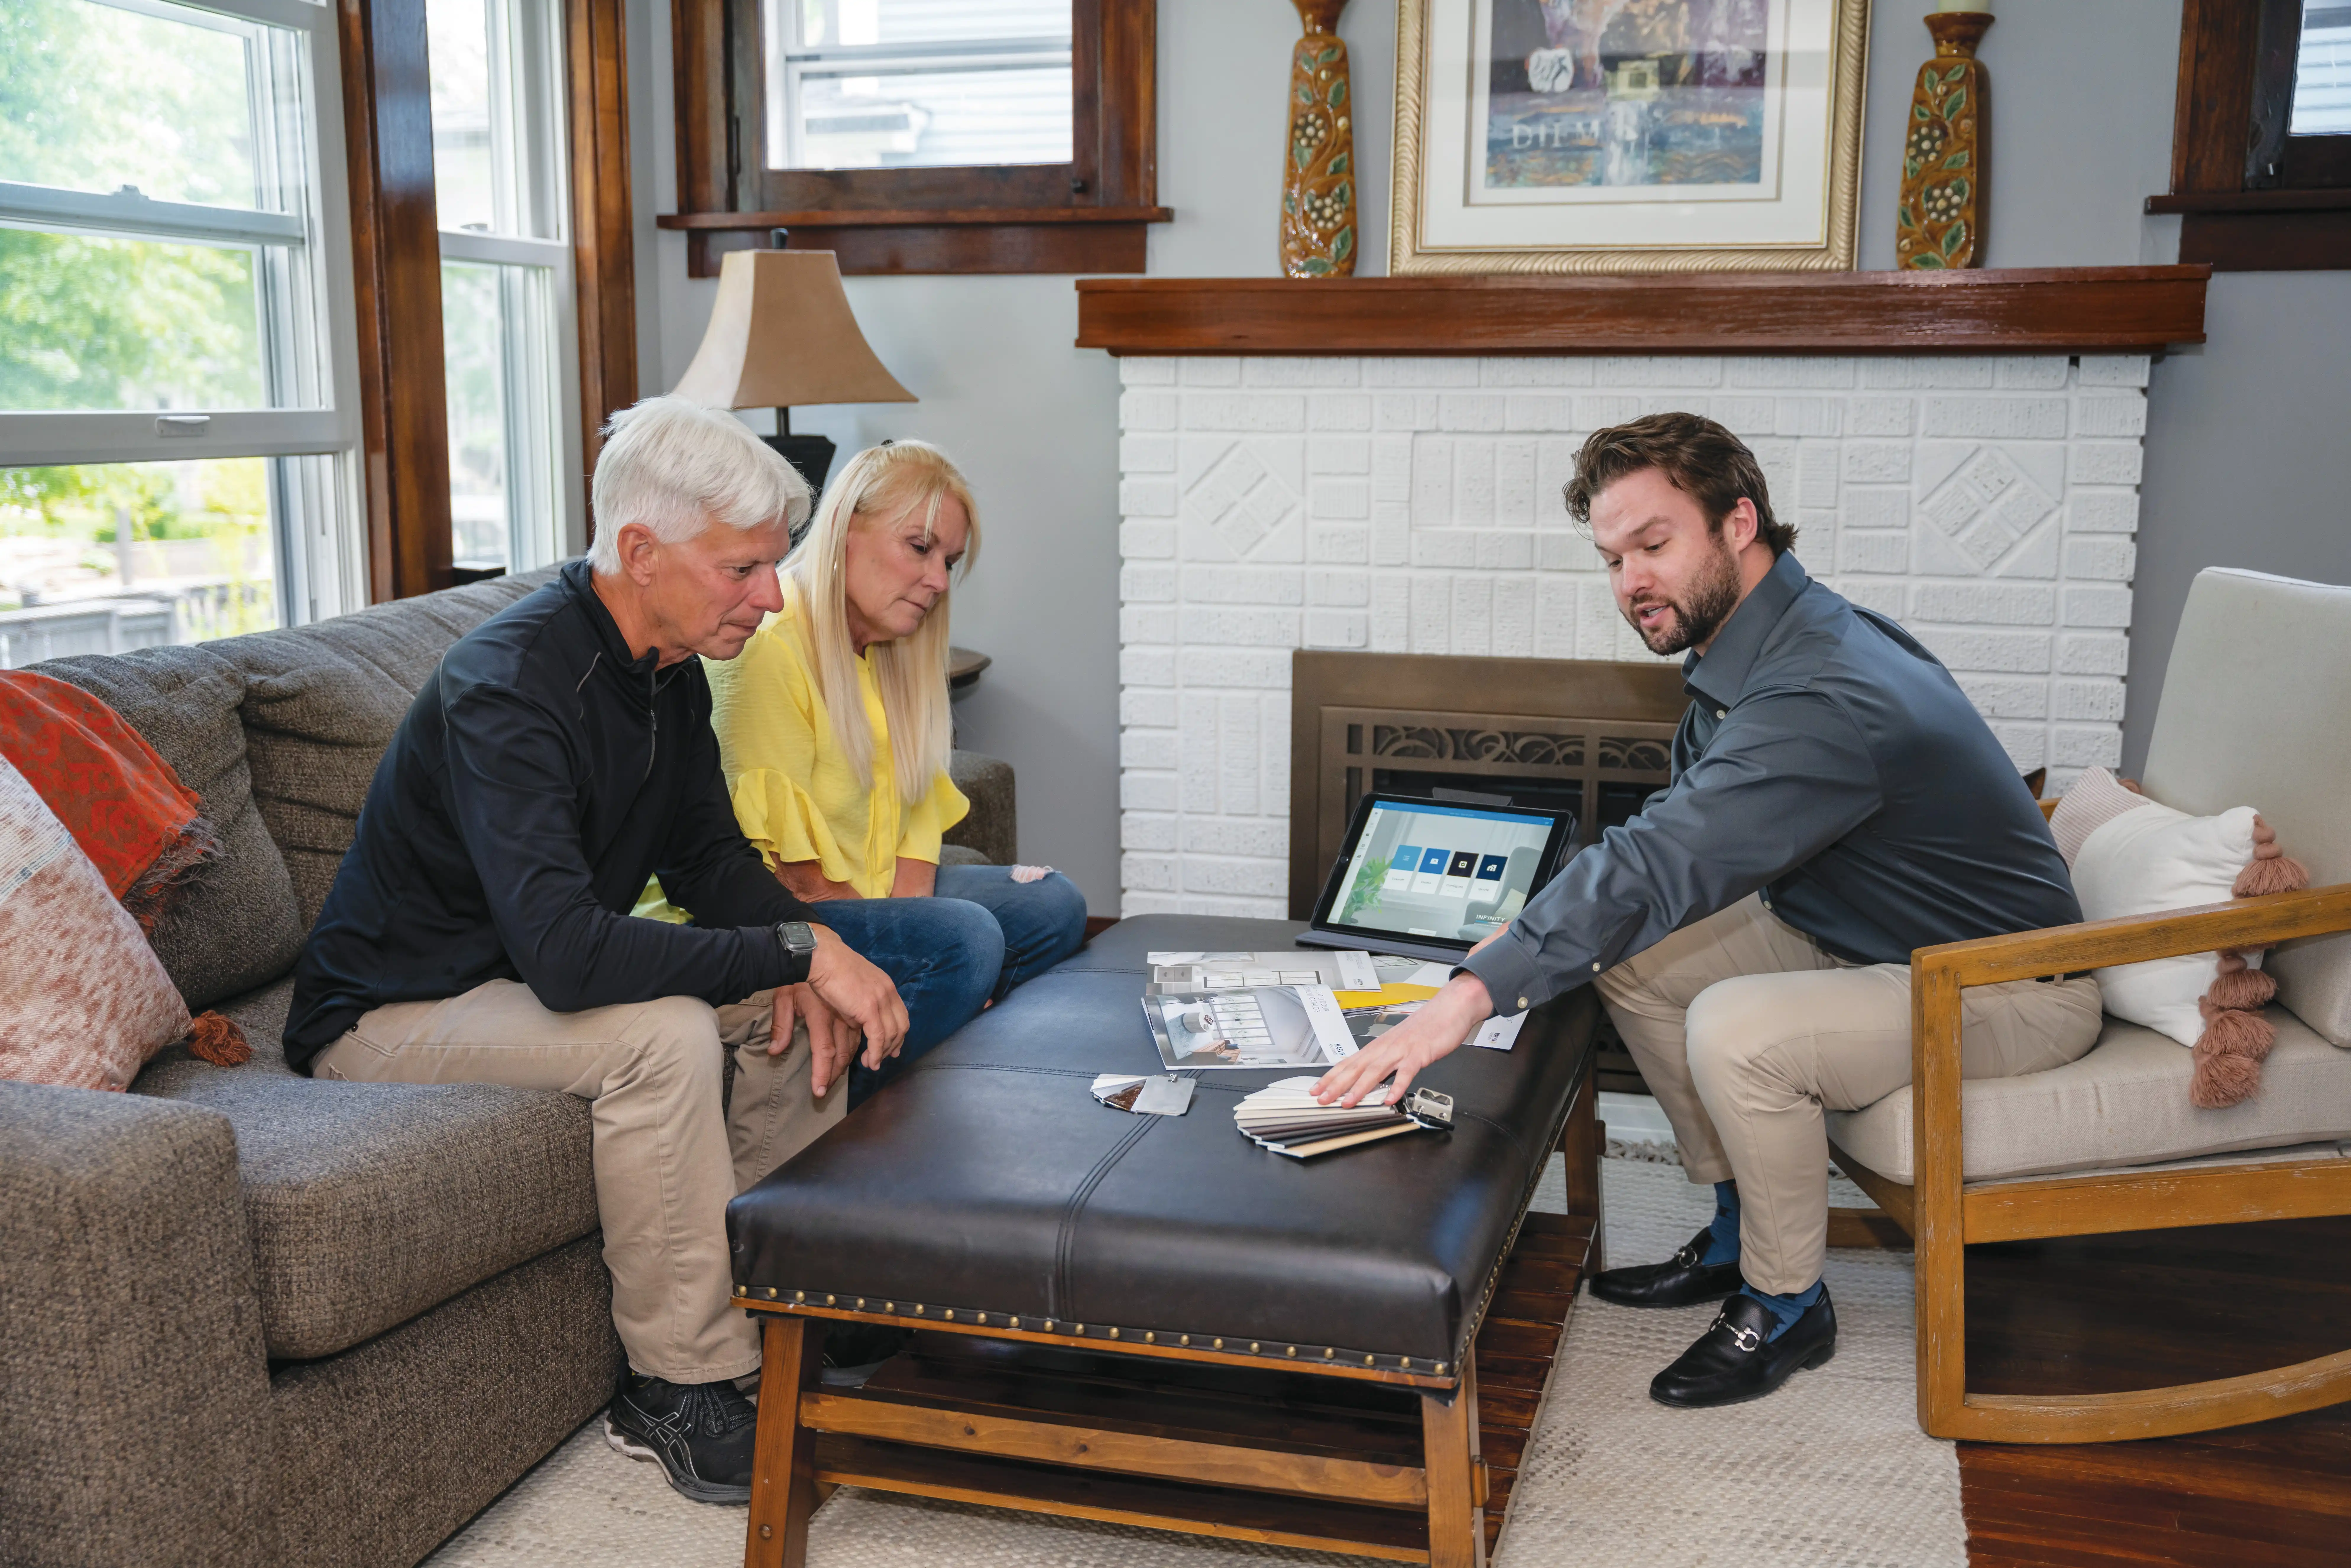 A Marvin Replacement design consultant talks with a middle aged couple about window and patio door design options in a living room.